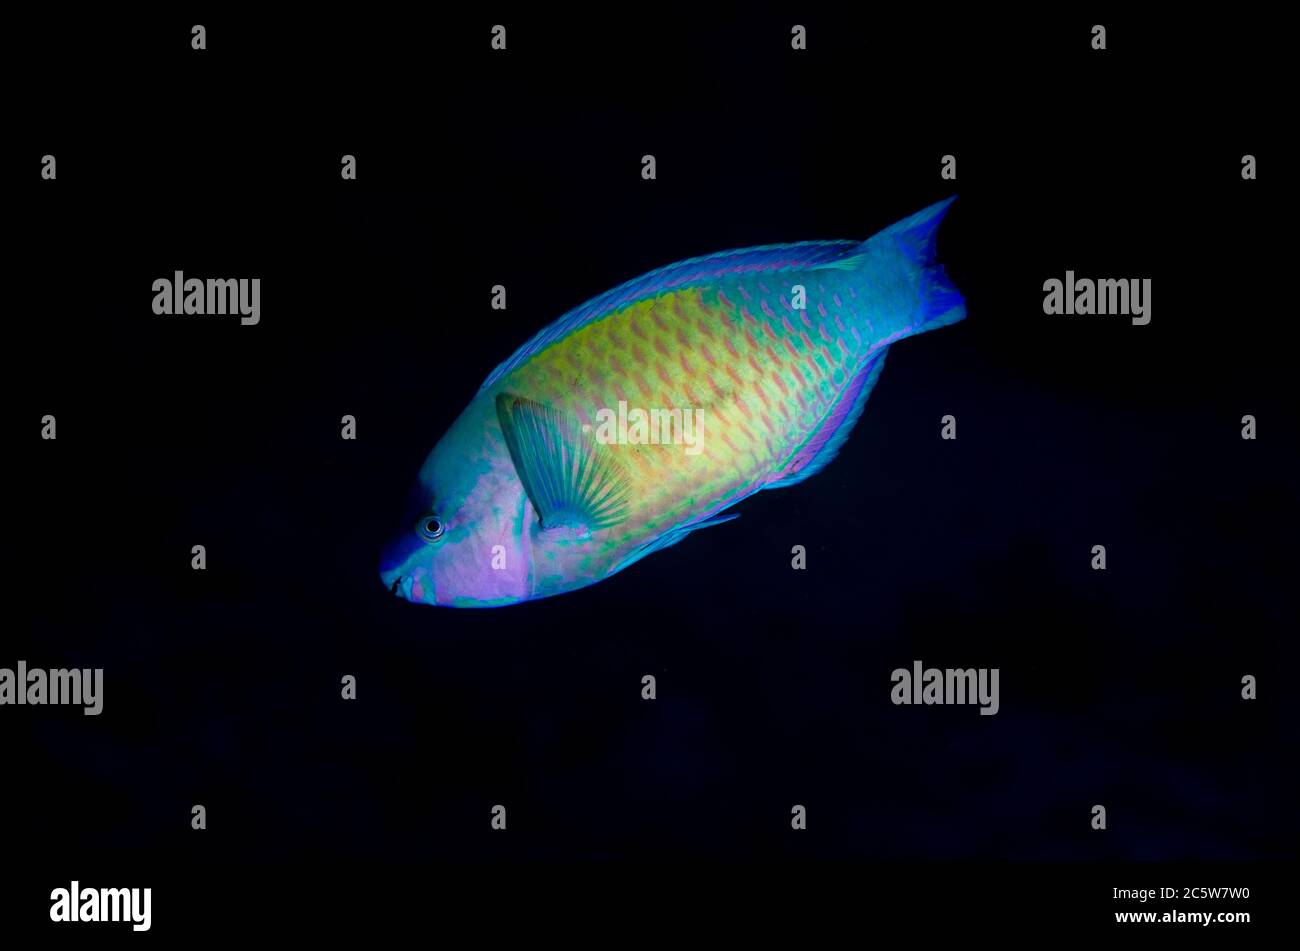 Palenose Parrotfish, Scarus psittacus, night dive, Murex House Reef dive site, Bangka Island, north Sulawesi, Indonesia, Pacific Ocean Stock Photo